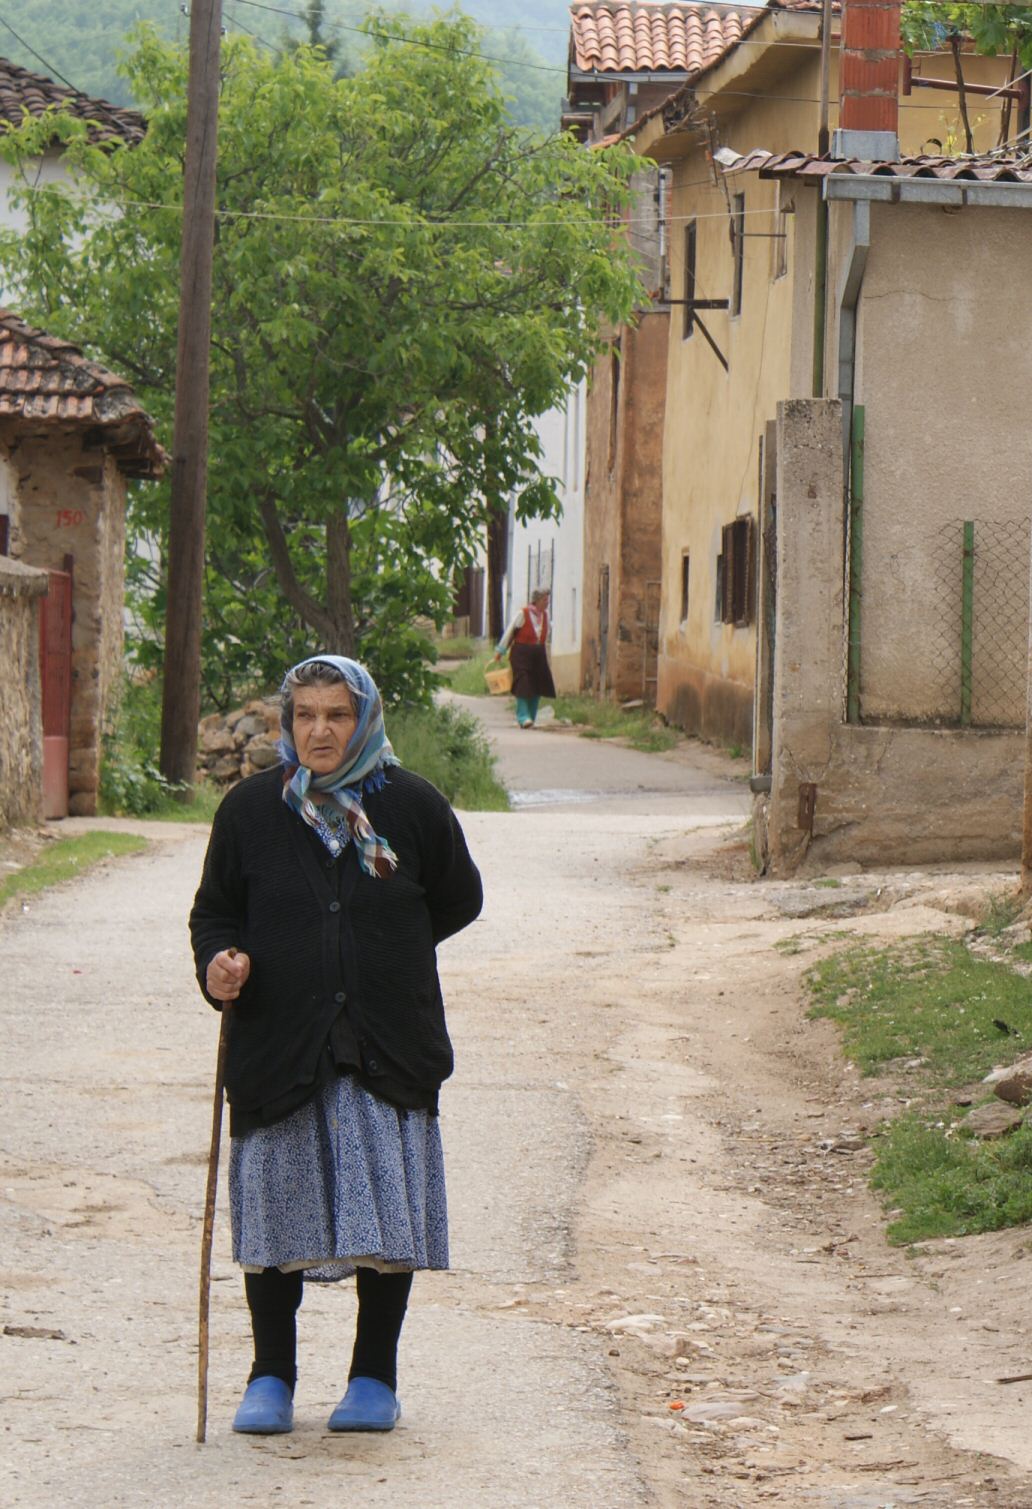 a woman walking down a street in front of buildings